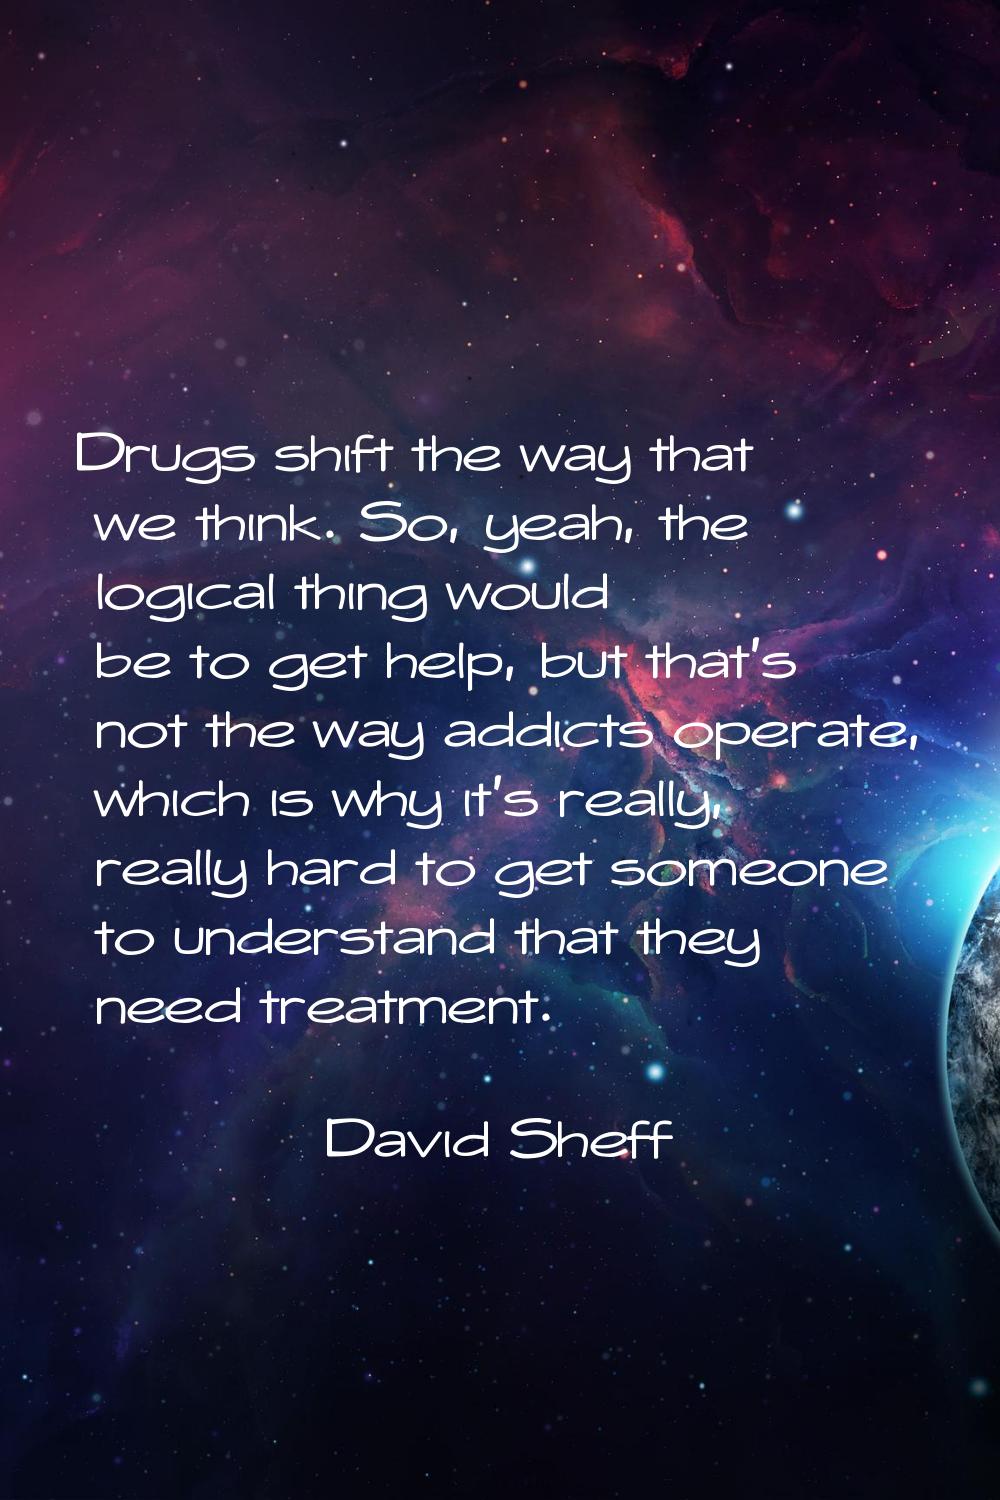 Drugs shift the way that we think. So, yeah, the logical thing would be to get help, but that's not